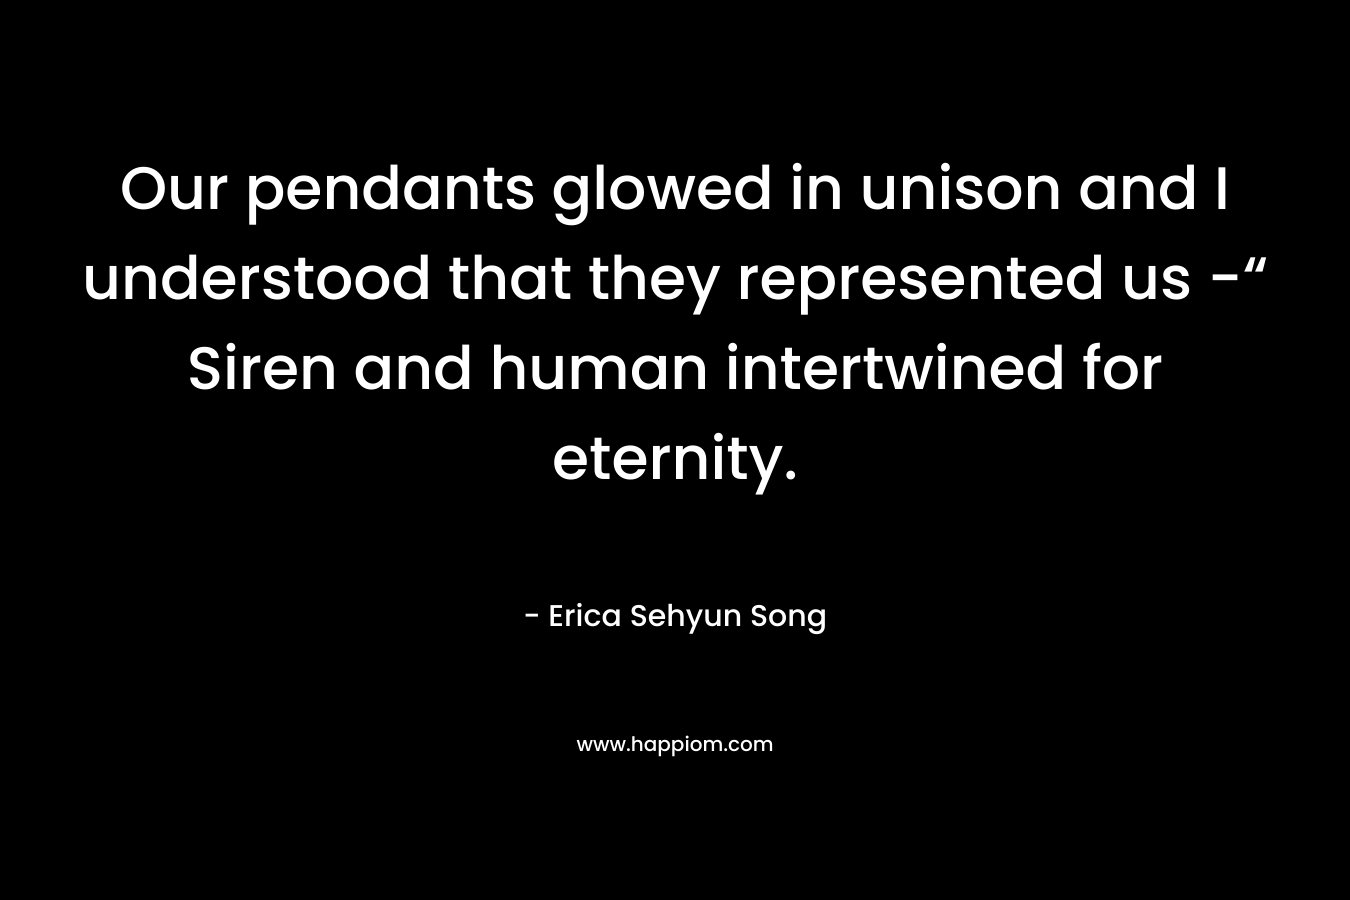 Our pendants glowed in unison and I understood that they represented us -“ Siren and human intertwined for eternity. – Erica Sehyun Song